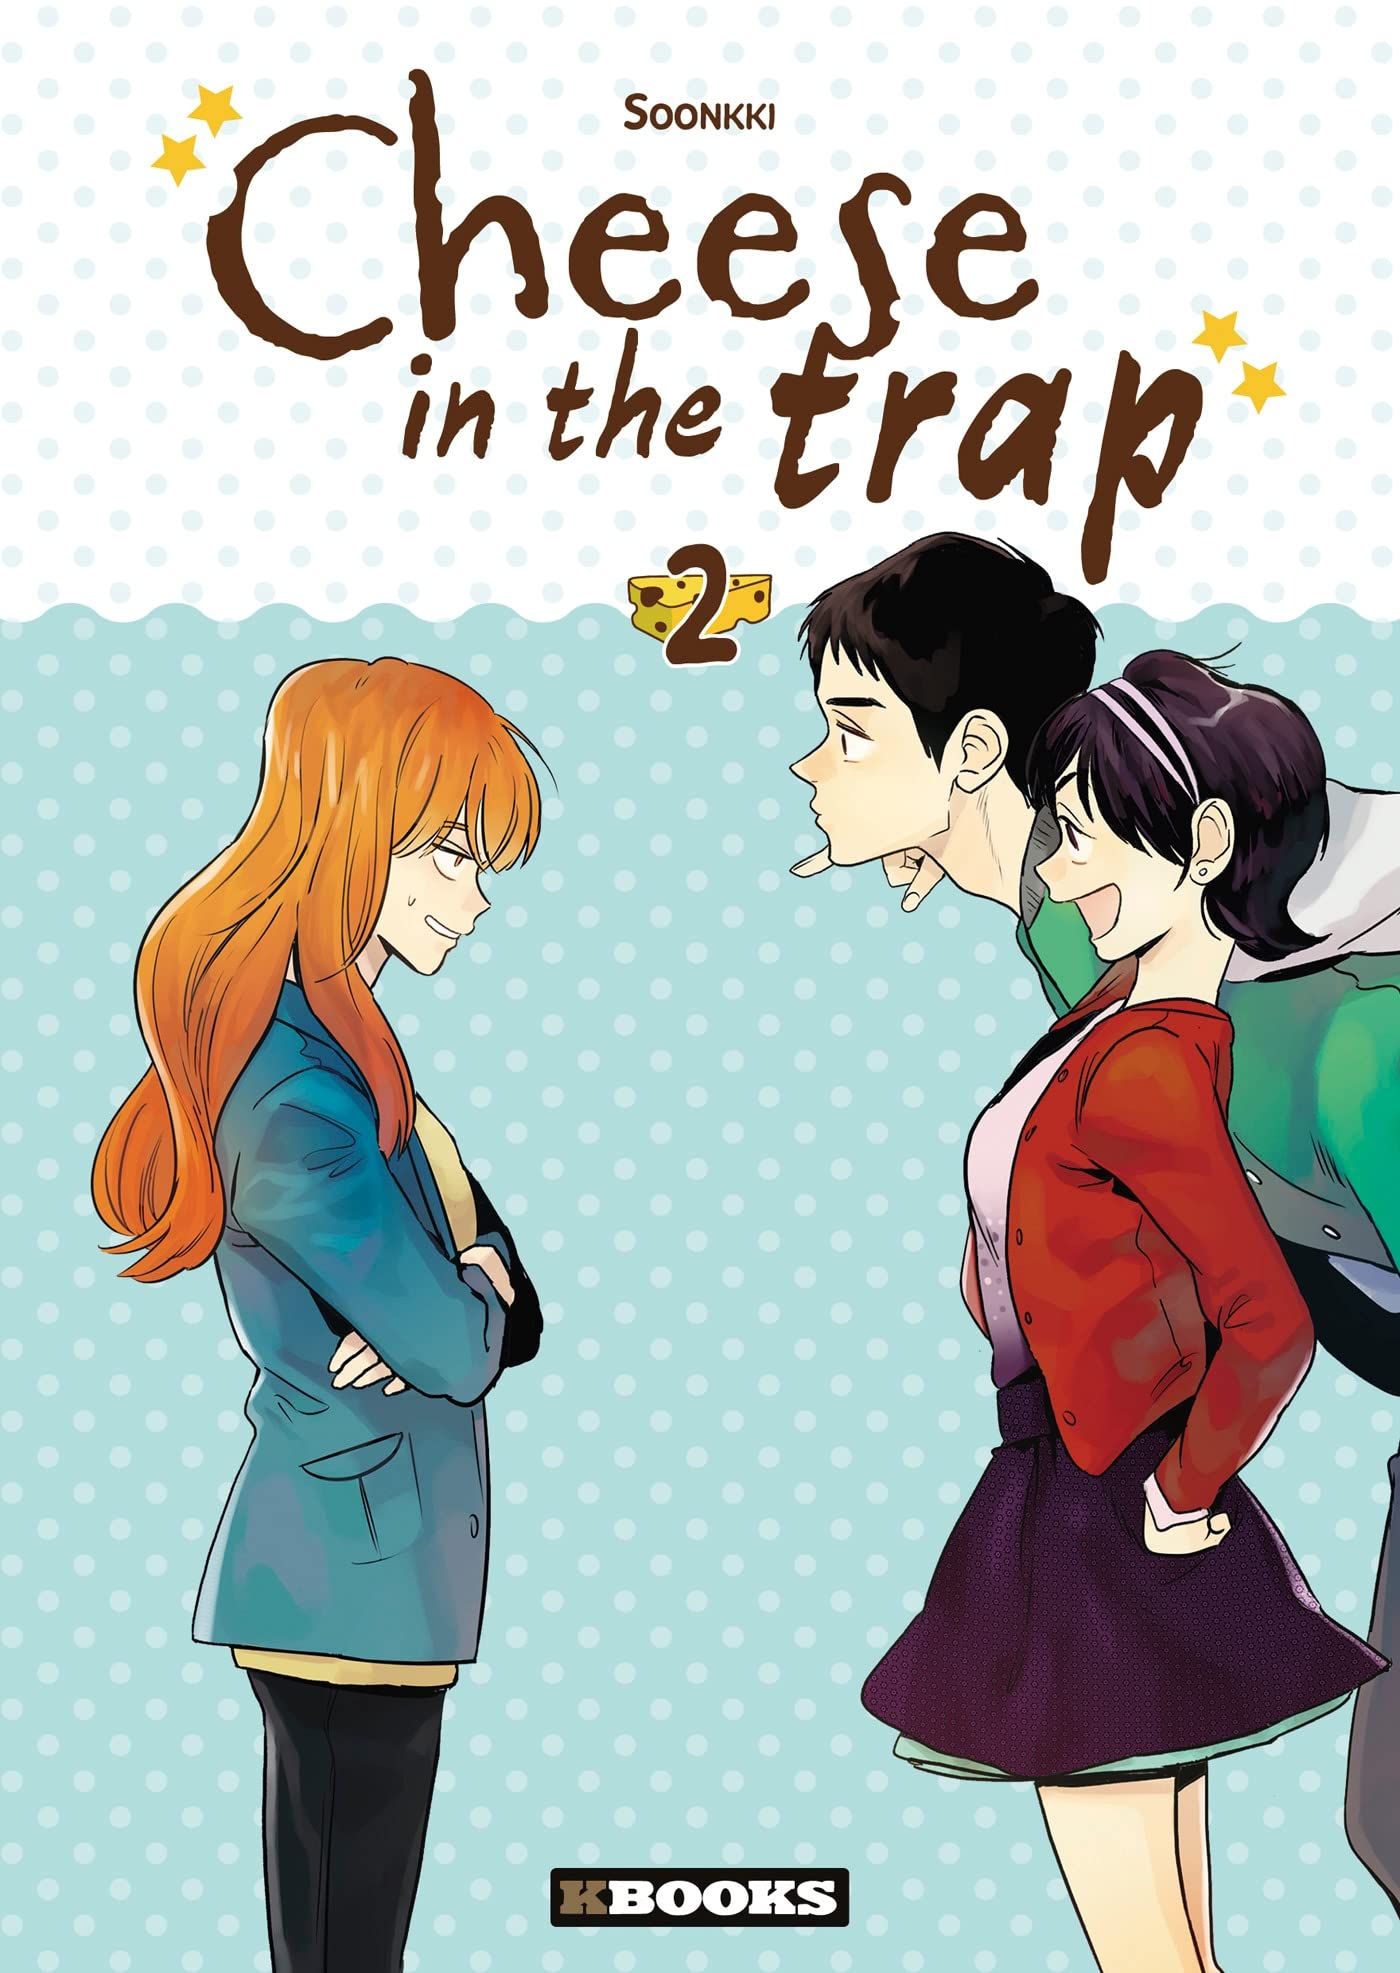 Cheese in the trap Vol.2